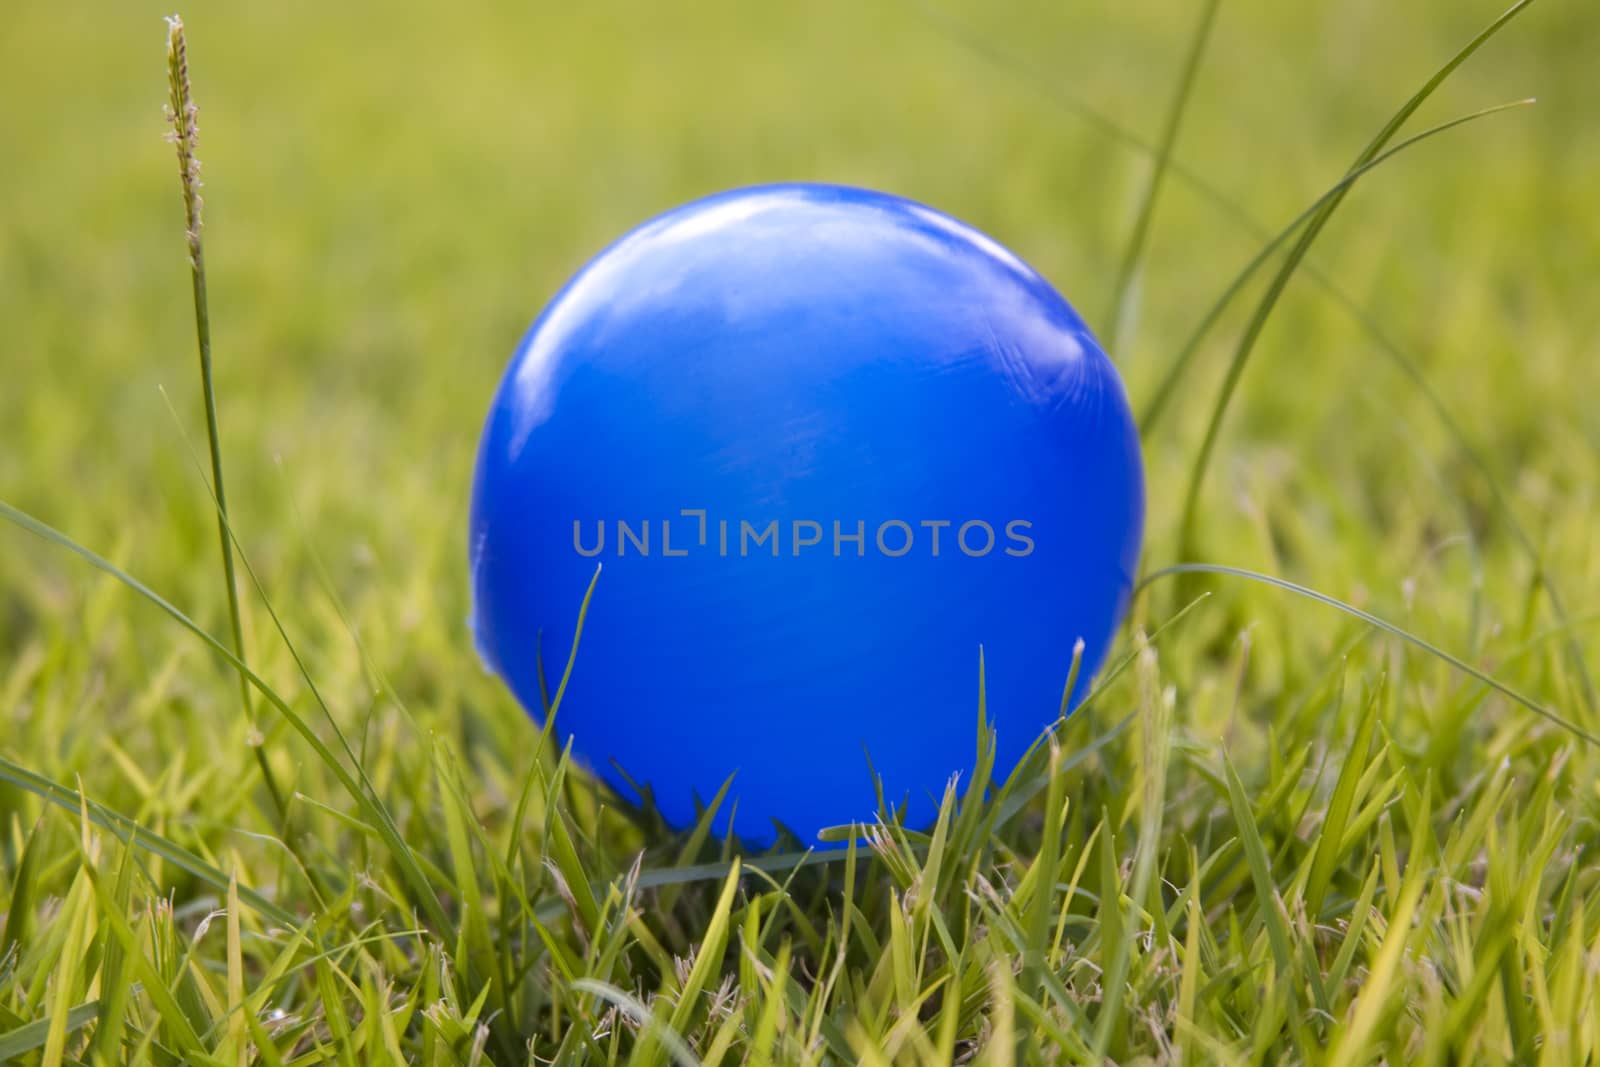 blue ball on green grass a sunny day in the park